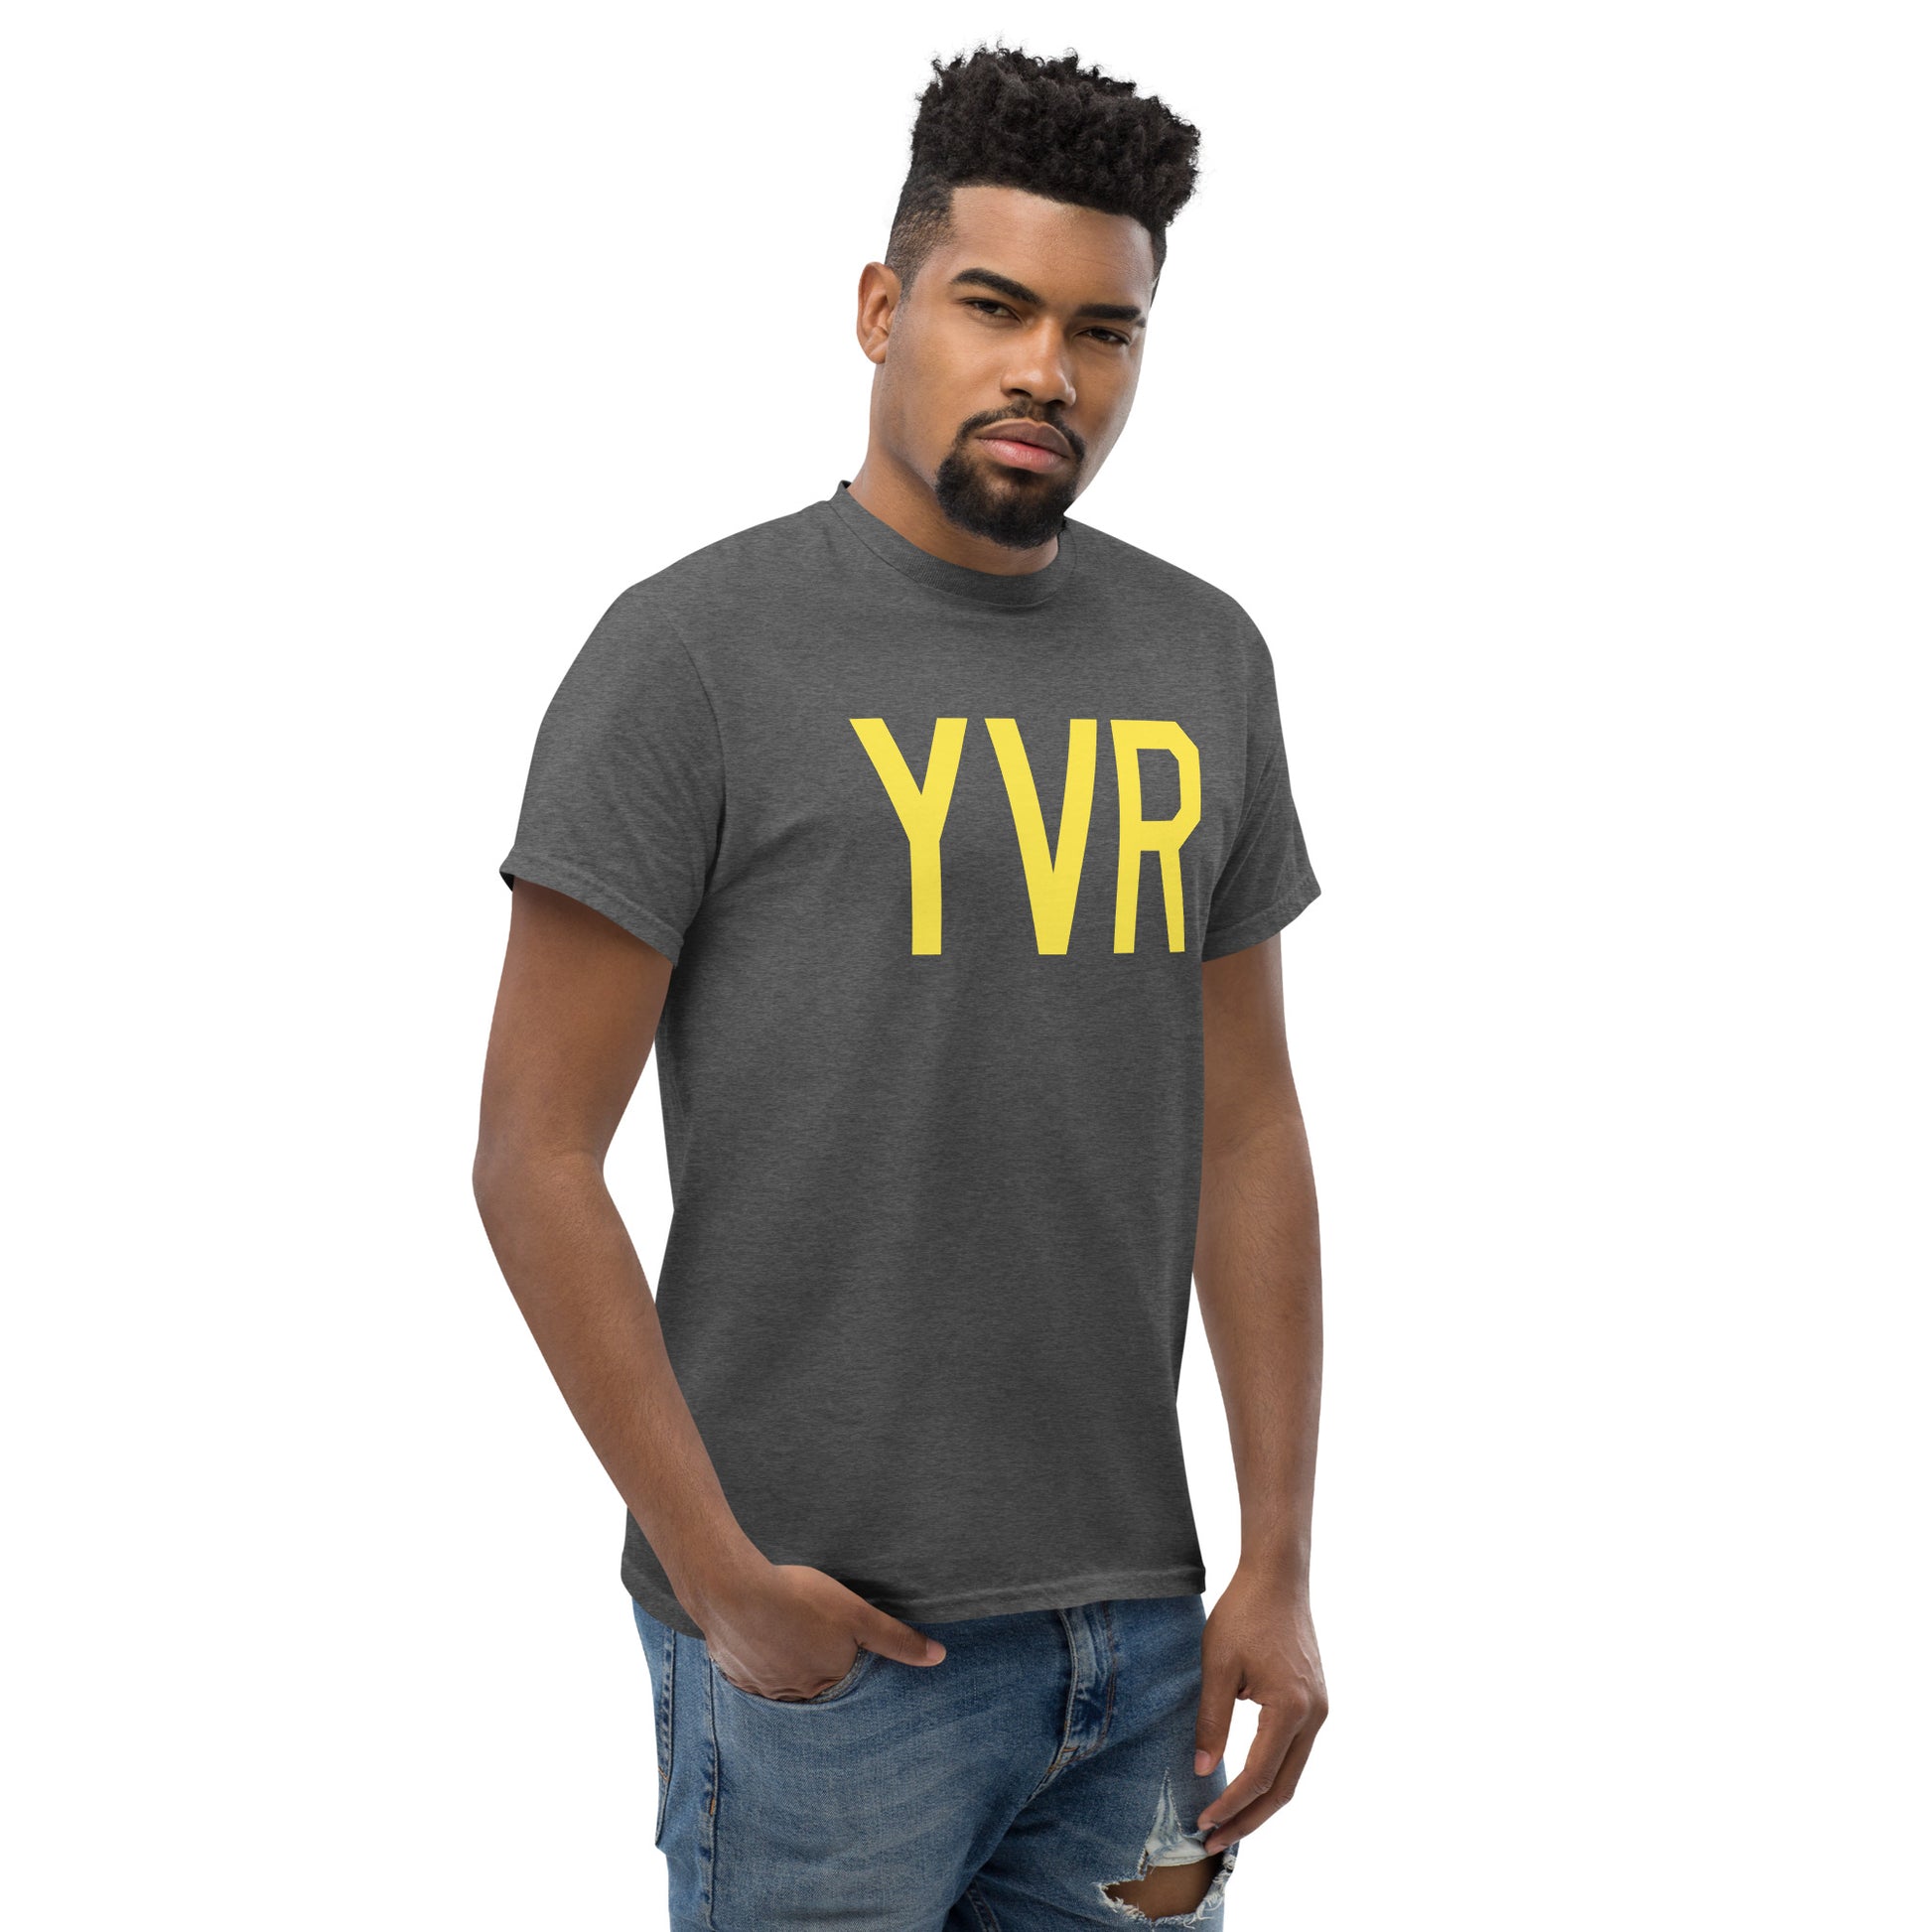 Aviation-Theme Men's T-Shirt - Yellow Graphic • YVR Vancouver • YHM Designs - Image 08